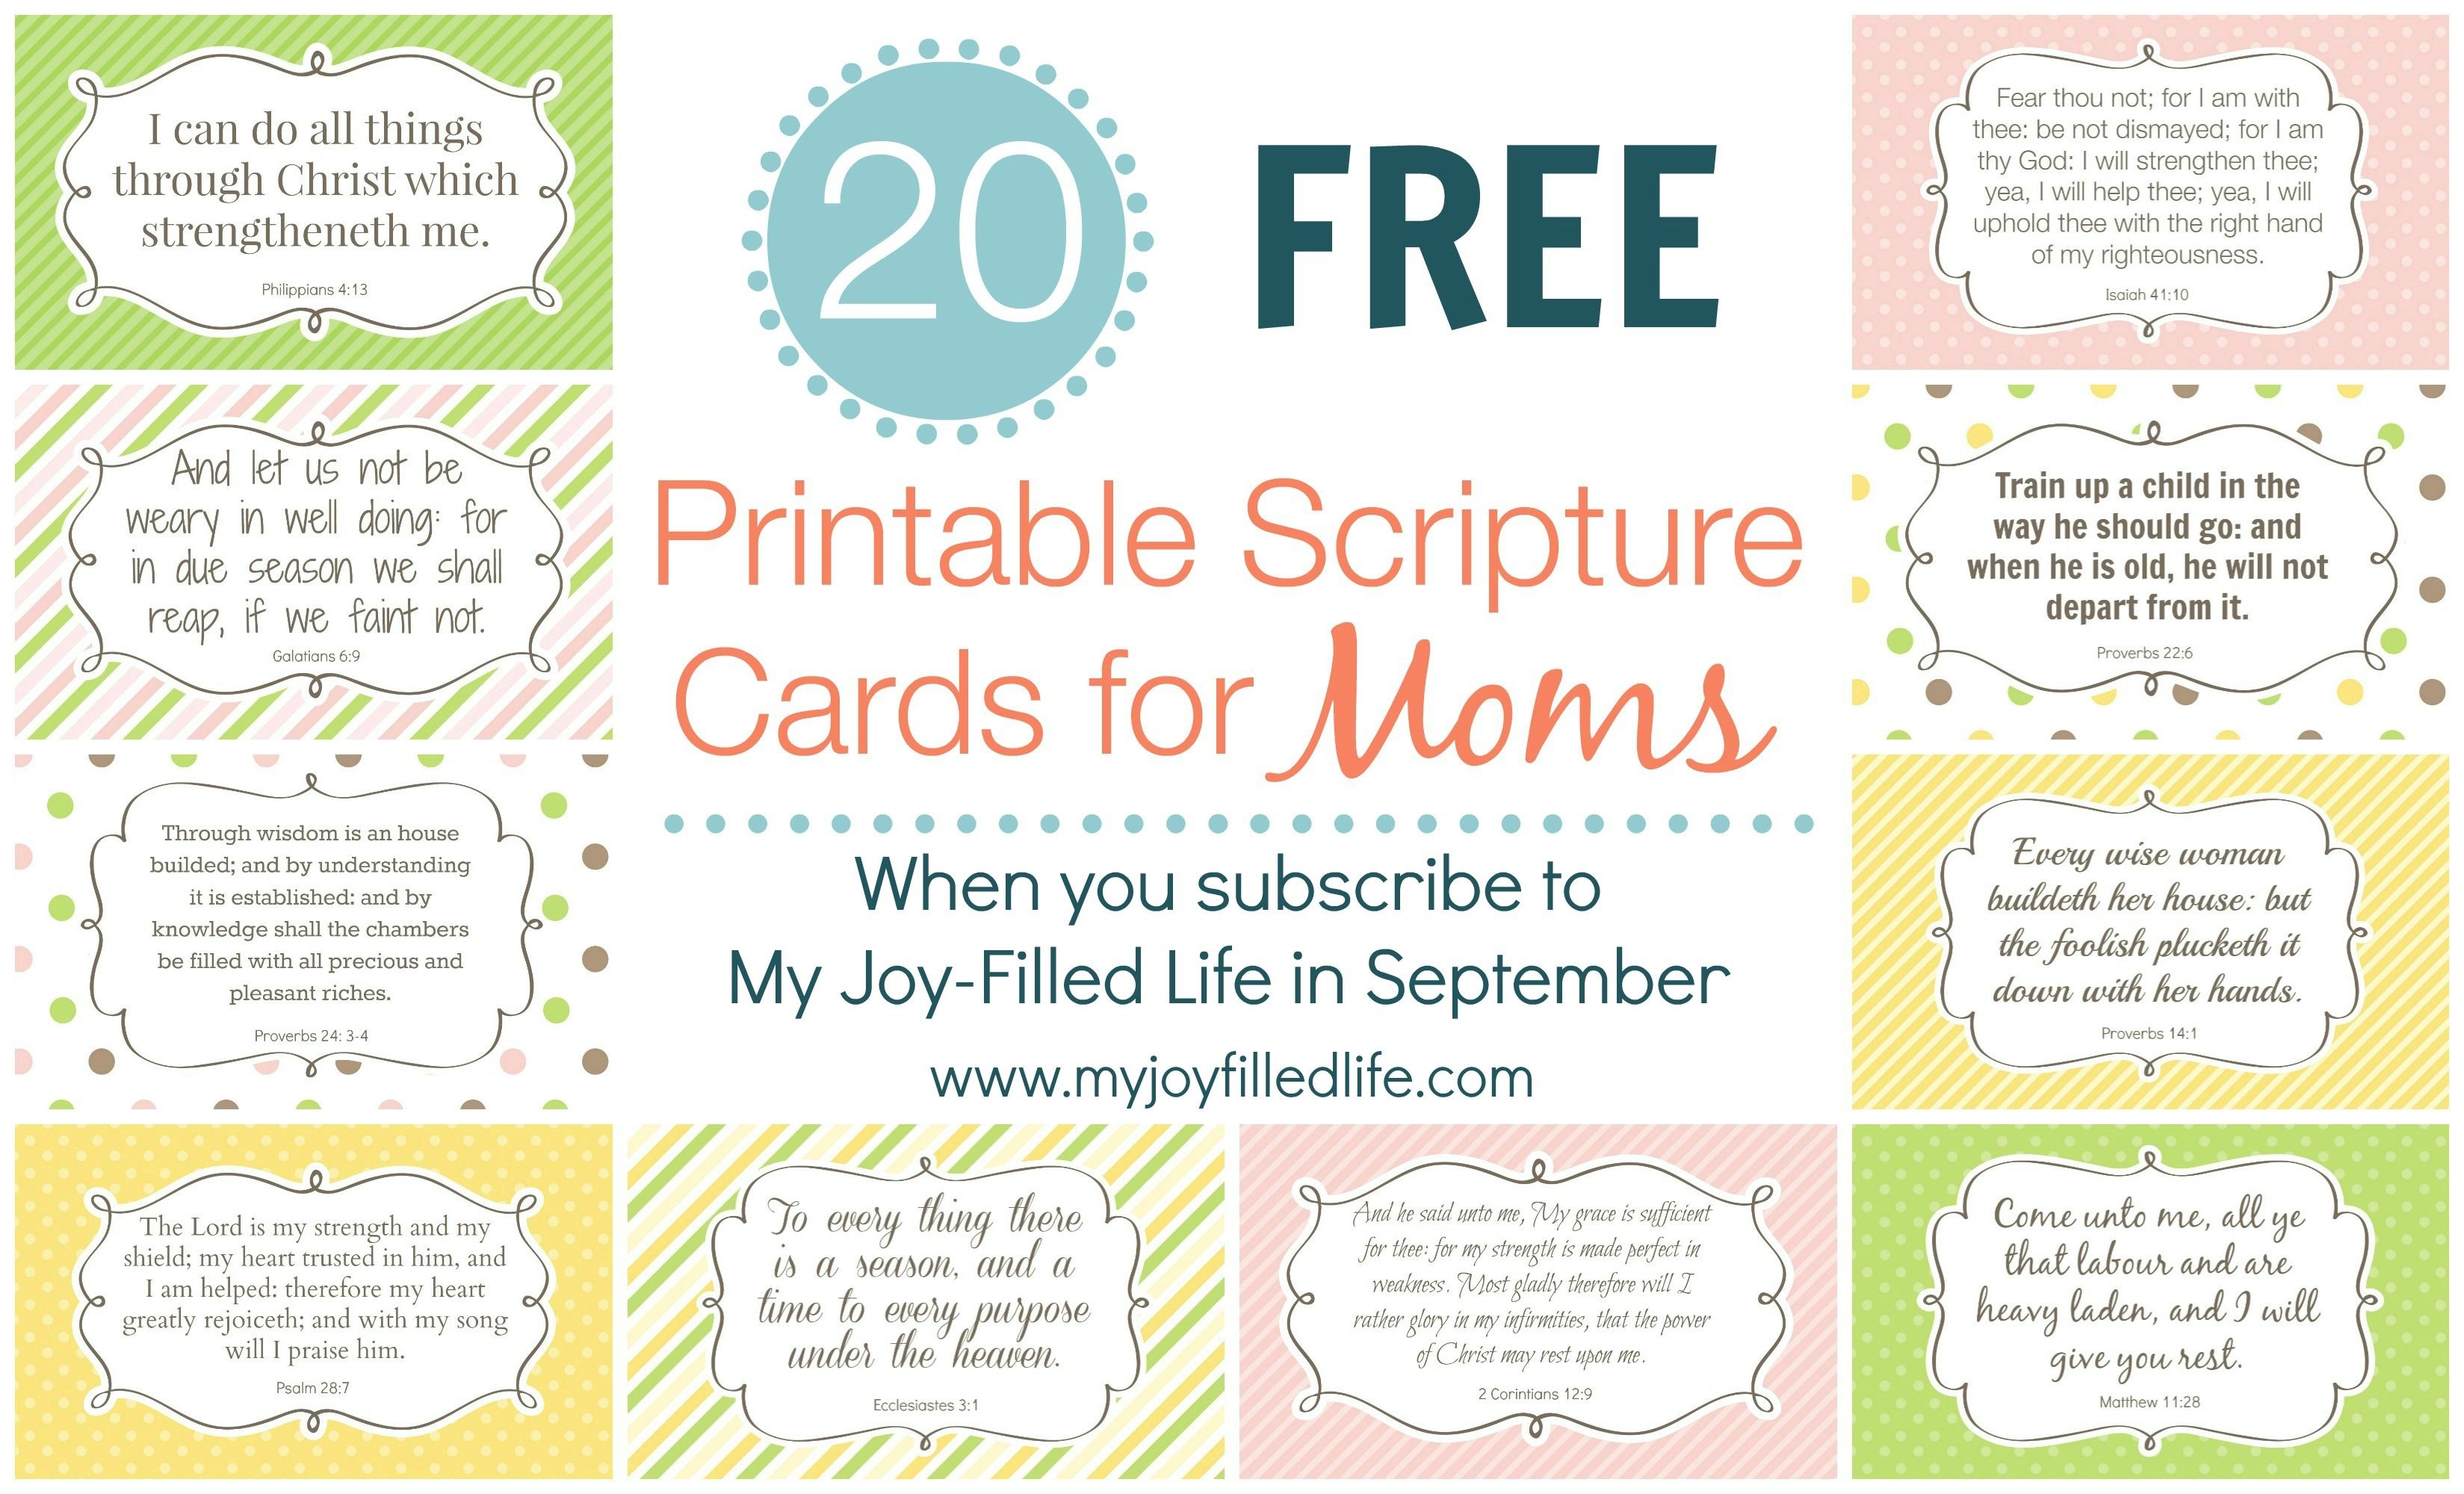 Encouragement For Moms - Free Printable Scripture Cards | Printables - Free Printable Prayer Cards